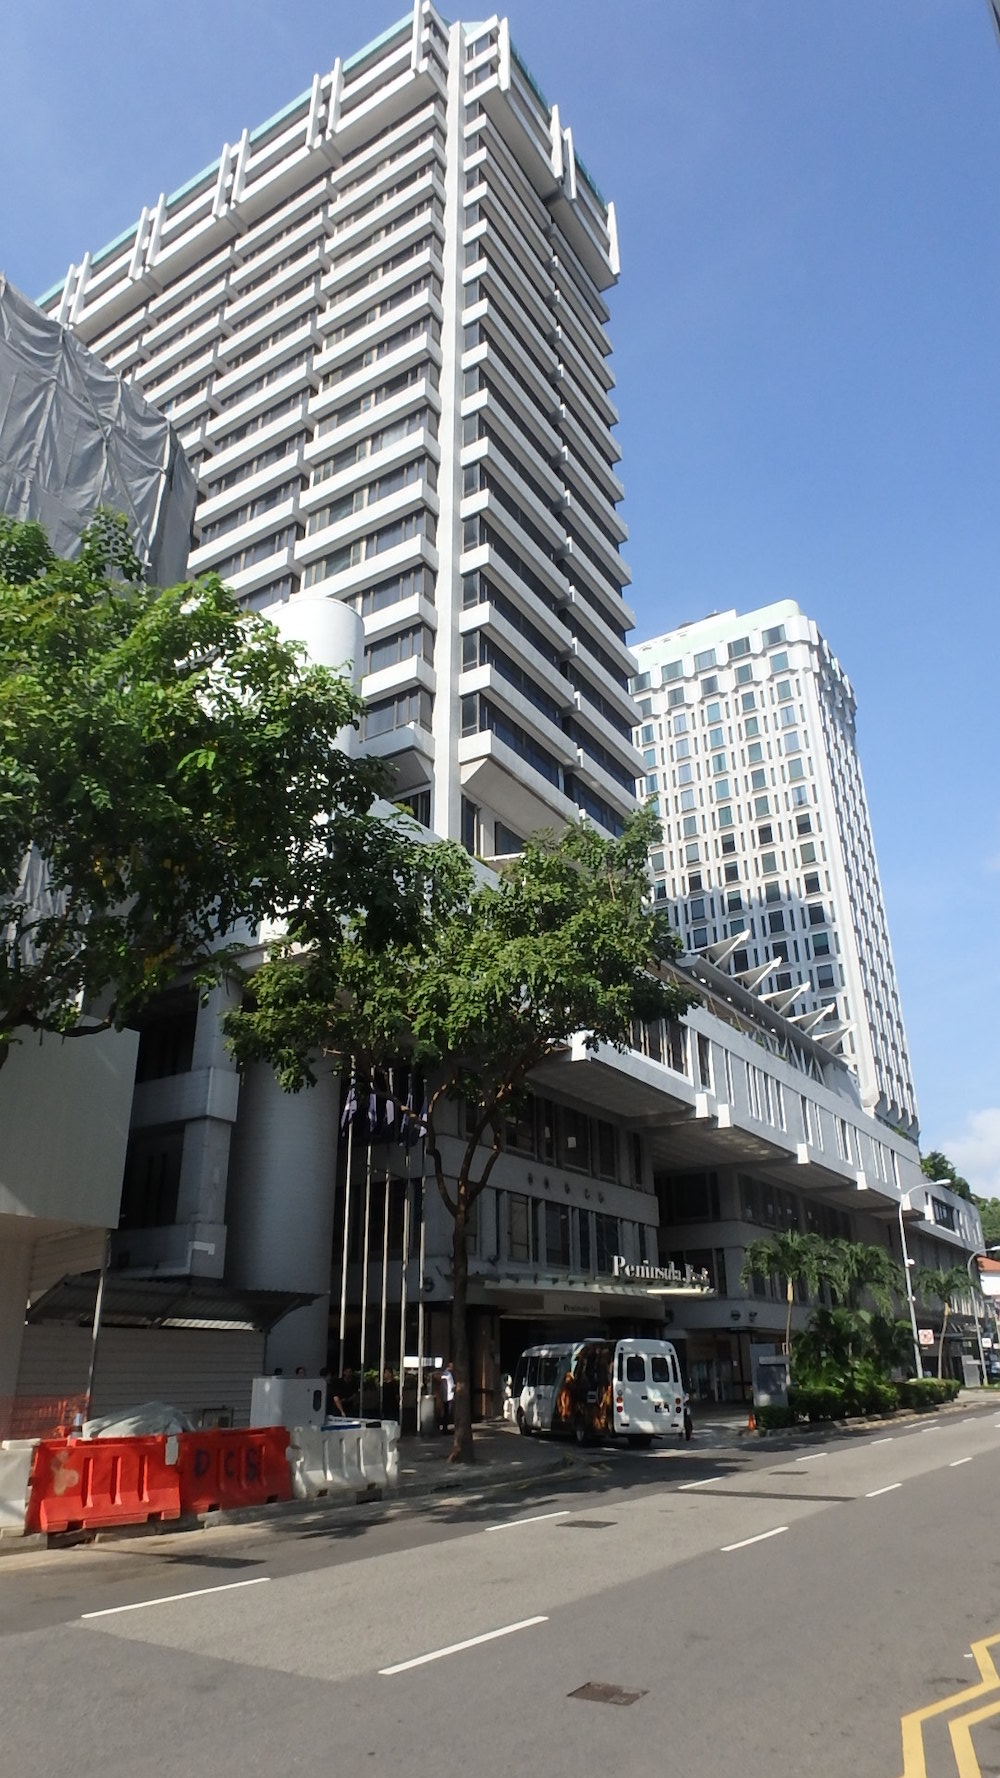 Coleman Street, which spans from Armenian Street to St Andrew’s road, was named after George D. Coleman, Singapore’s first Superintendent of Public Works and Prison Warden. 3 to 5 Coleman Street was the site of the Former Hotel de la Paix. Today, it is the address of Peninsula Shopping Complex.